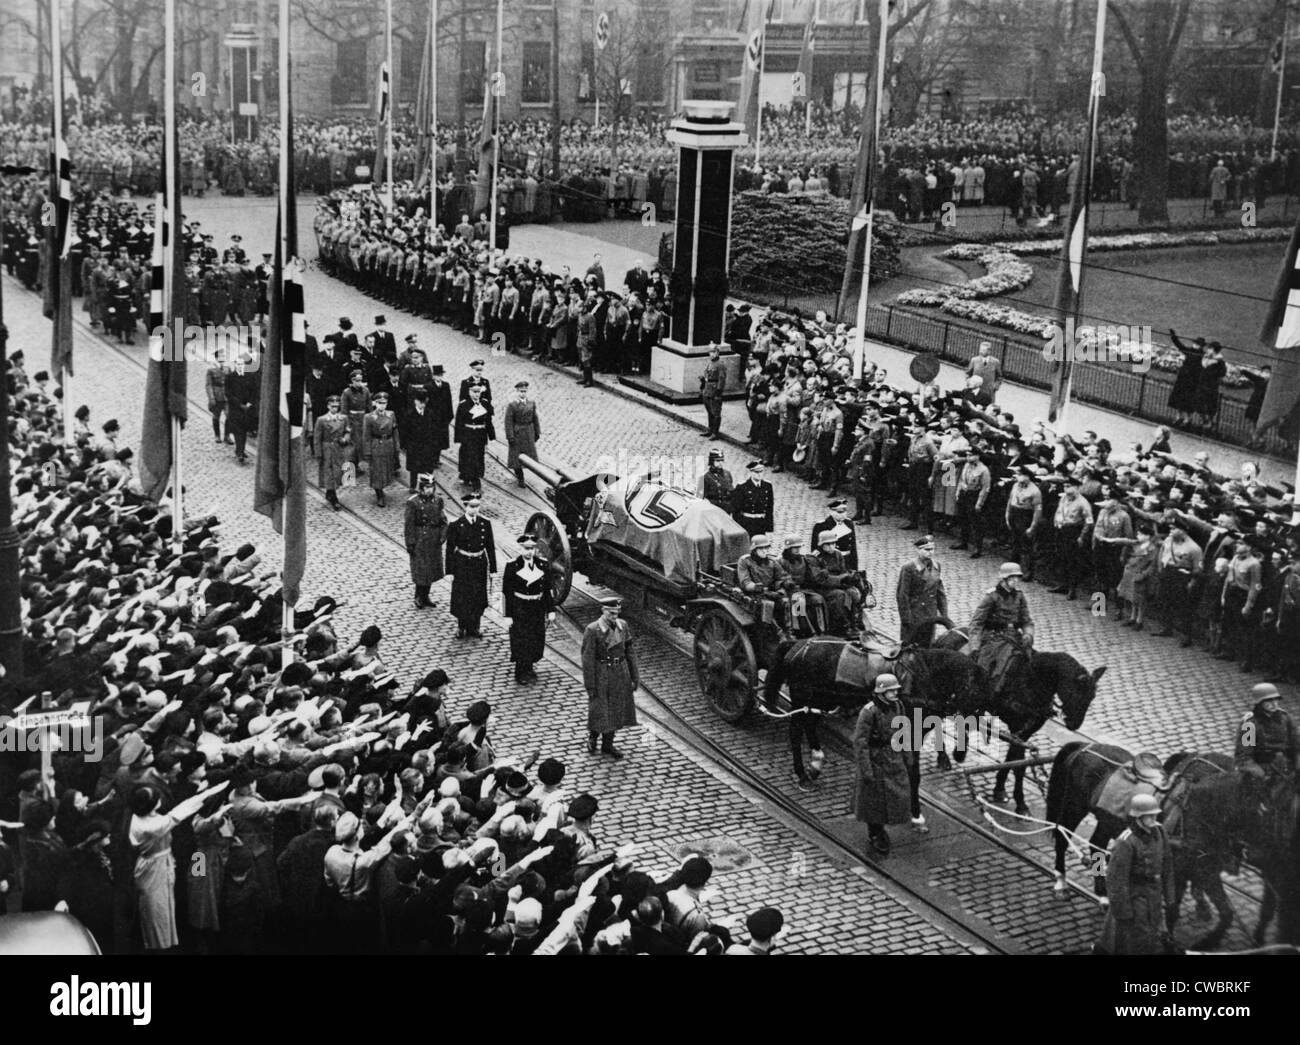 Funeral of Ernst vom Rath (1909-1938), a German diplomat assassinated in Paris in 1938 by a 17 year old exiled Jew, Herschel Stock Photo